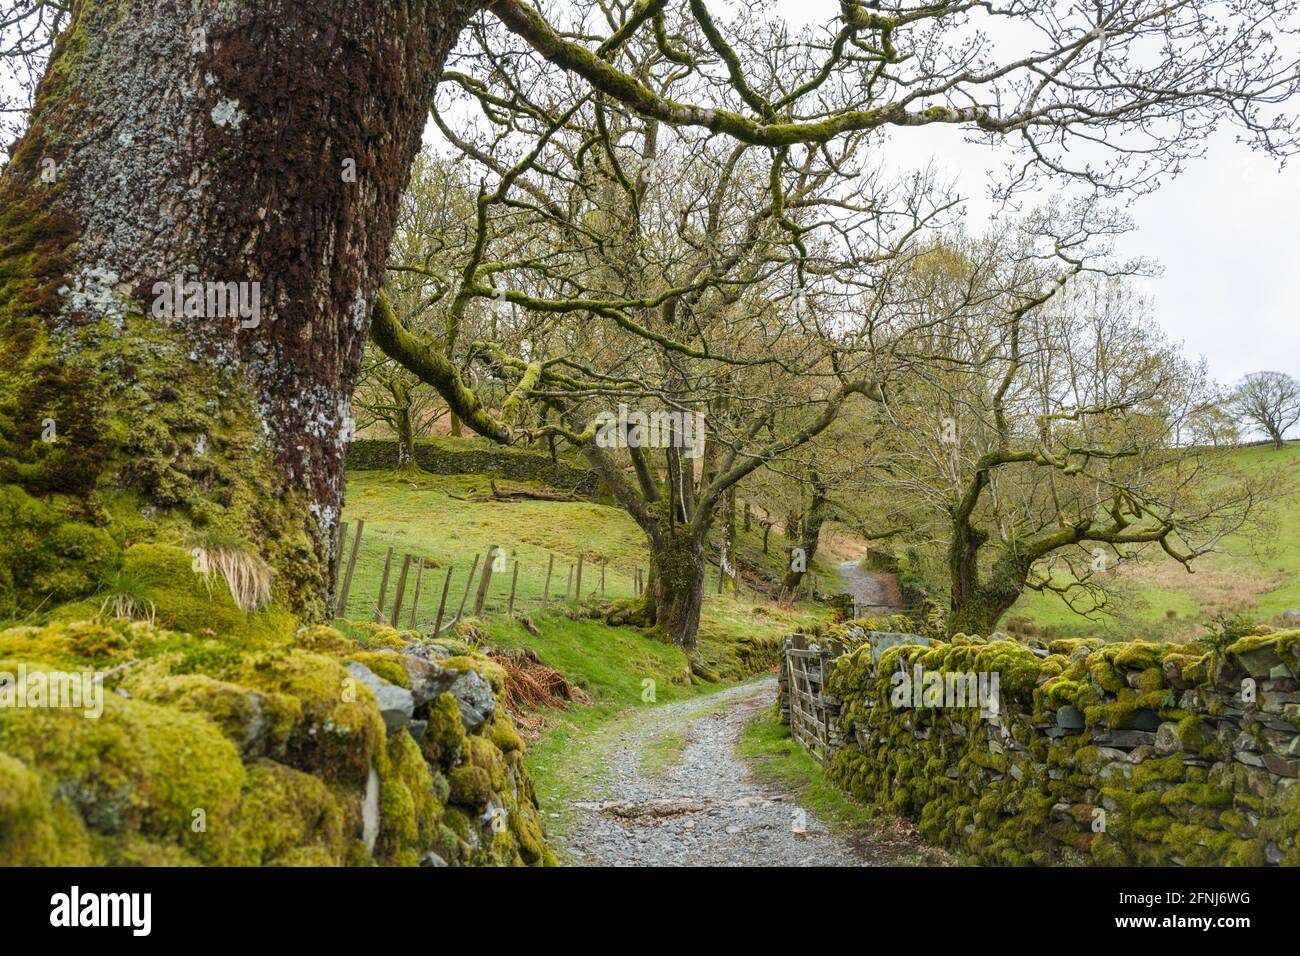 Narrow country lane with traditional dry stone walling, Coniston, Lake Disrtict, Cumbria, England. Stock Photo